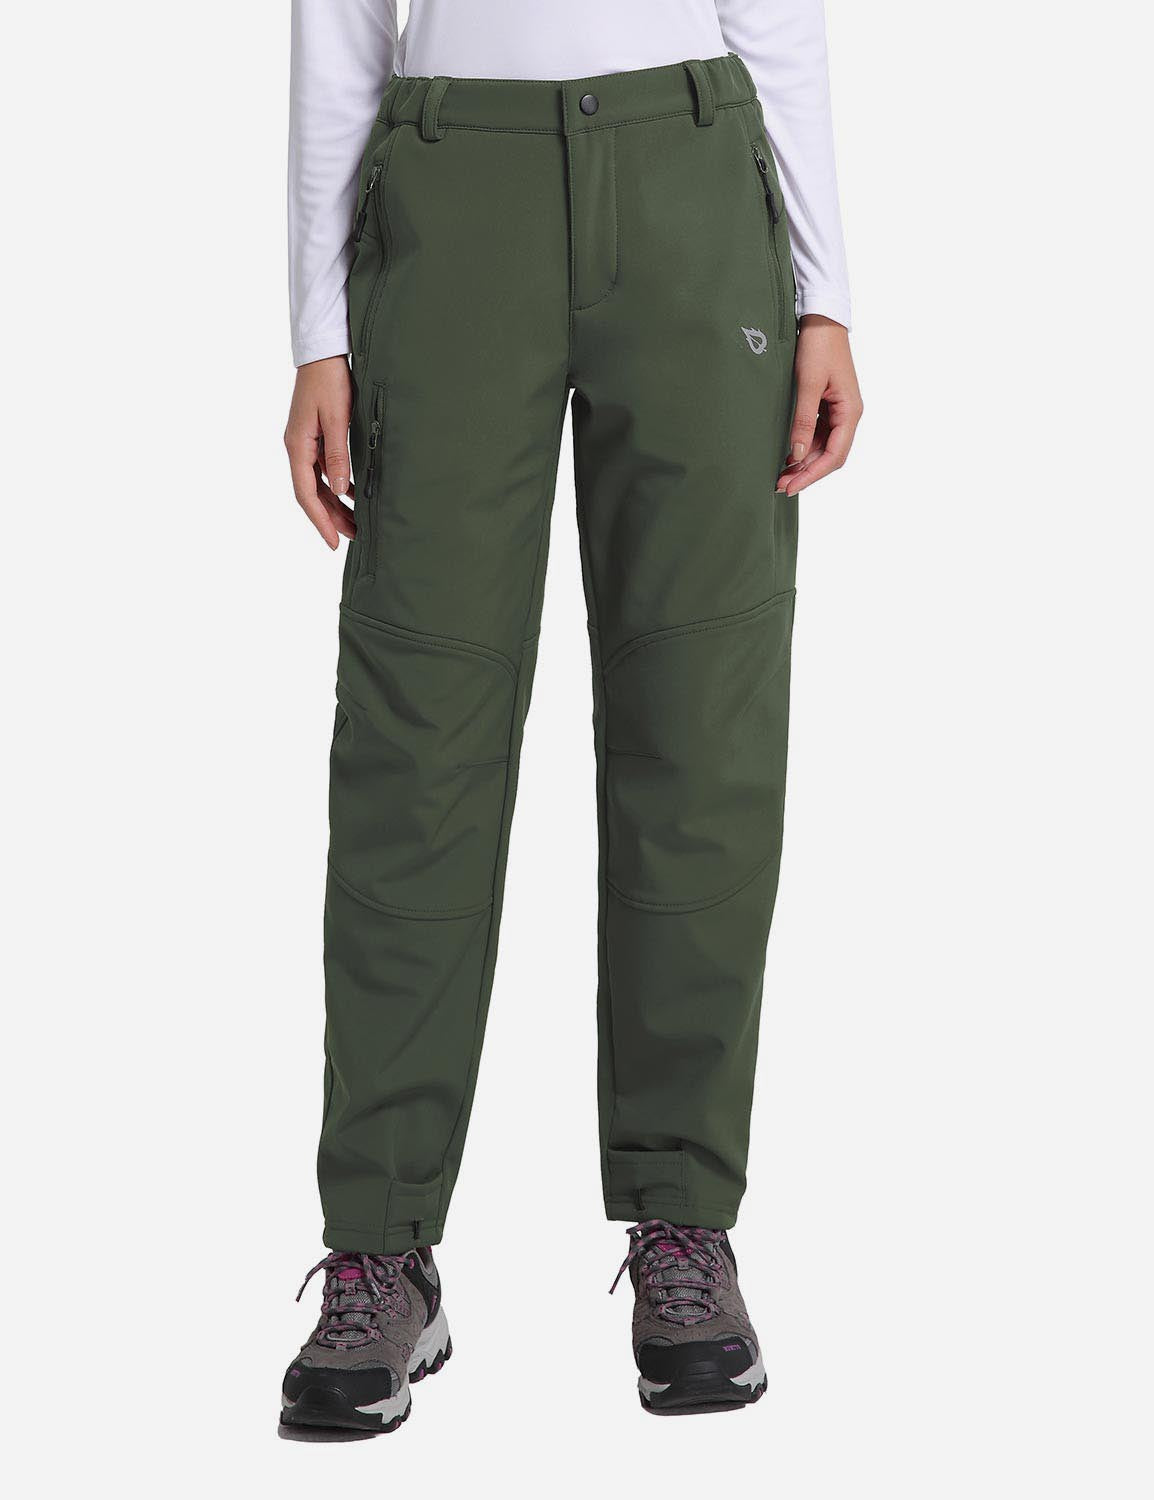 BALEAF Women's Hiking Pants Lightweight Quick Dry Water Resistant